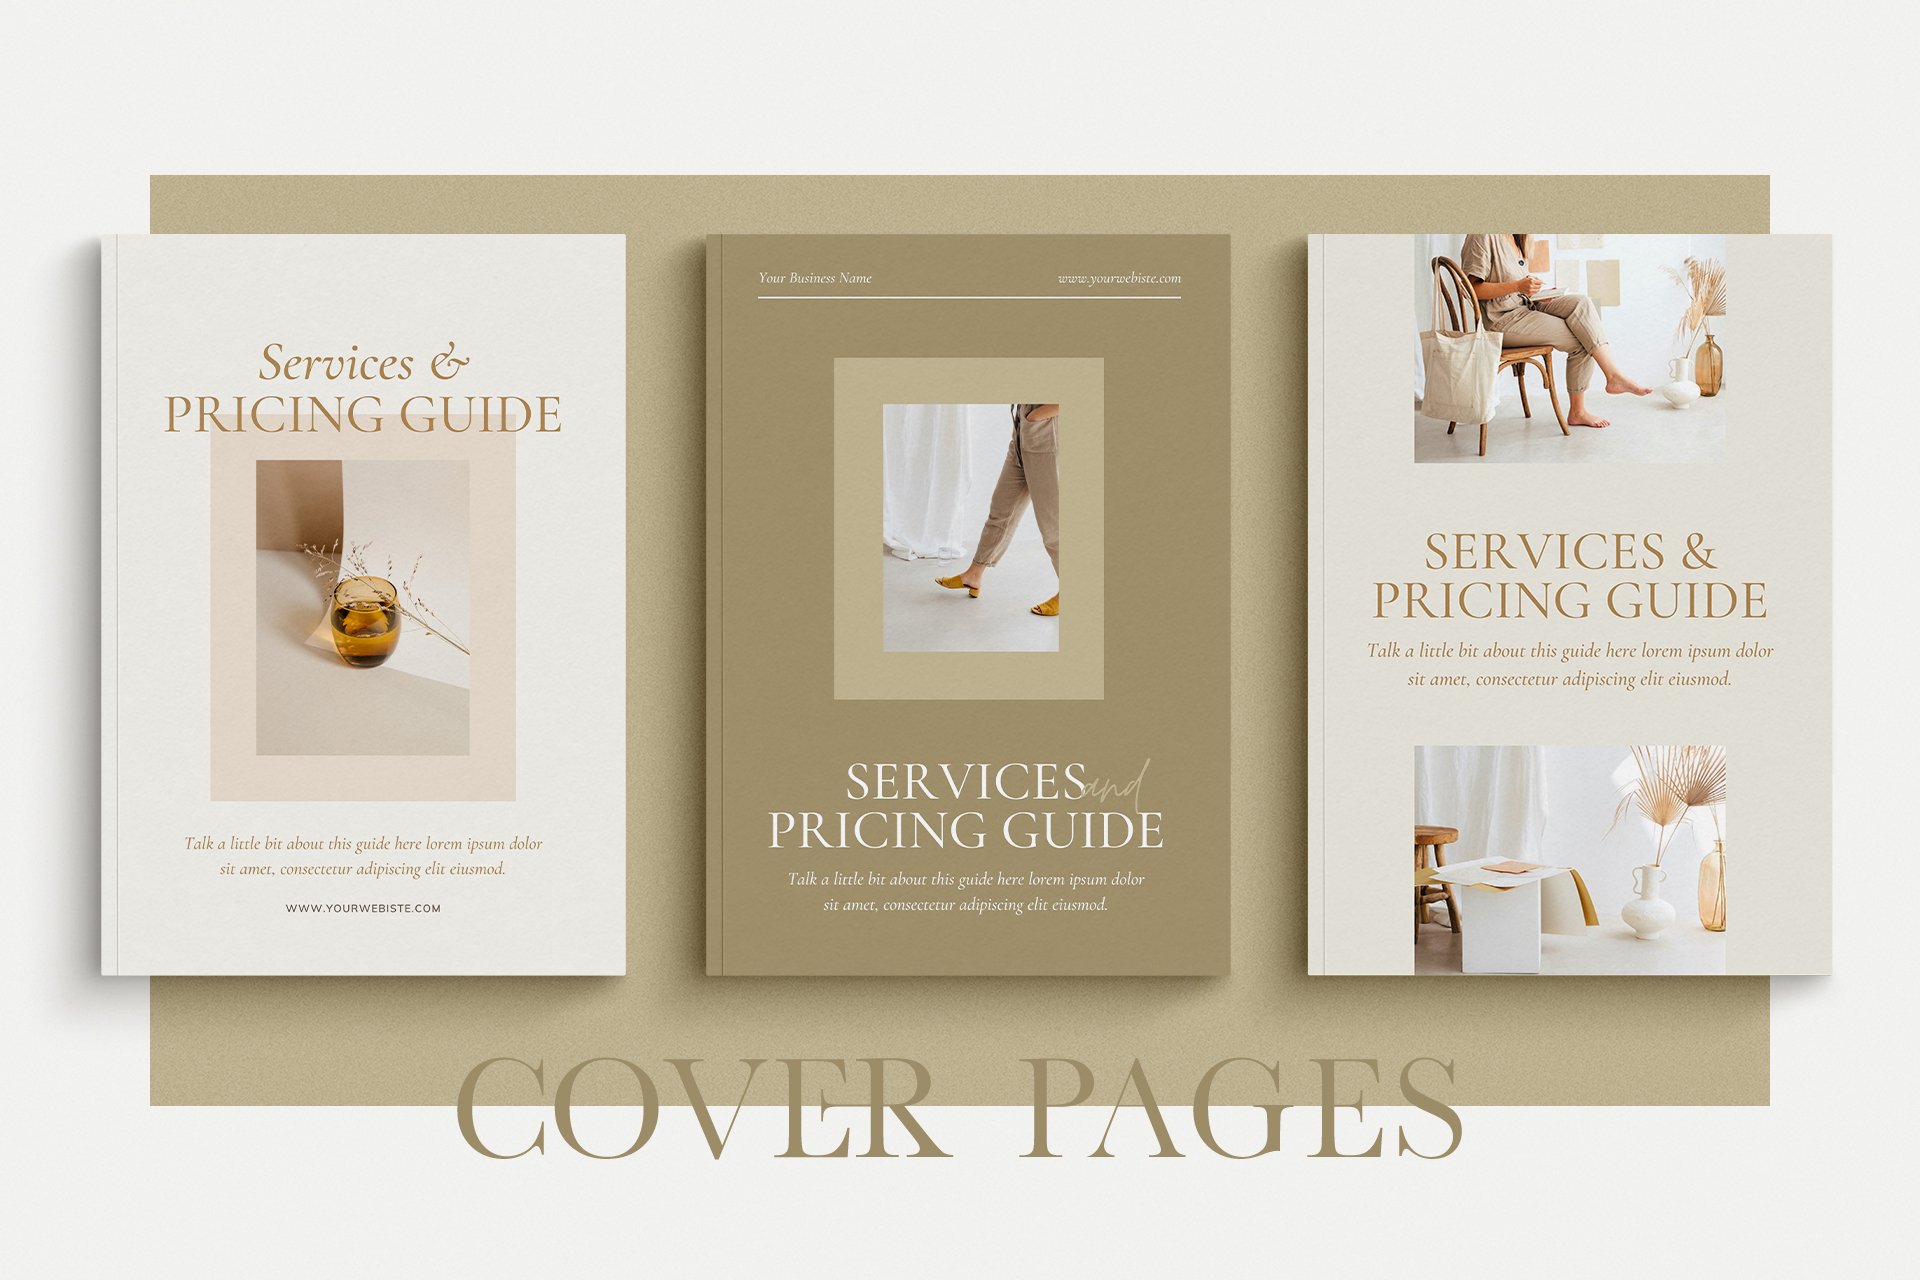 4 services pricing guide clinet proposal welcome packet workbook ebook template canva 544